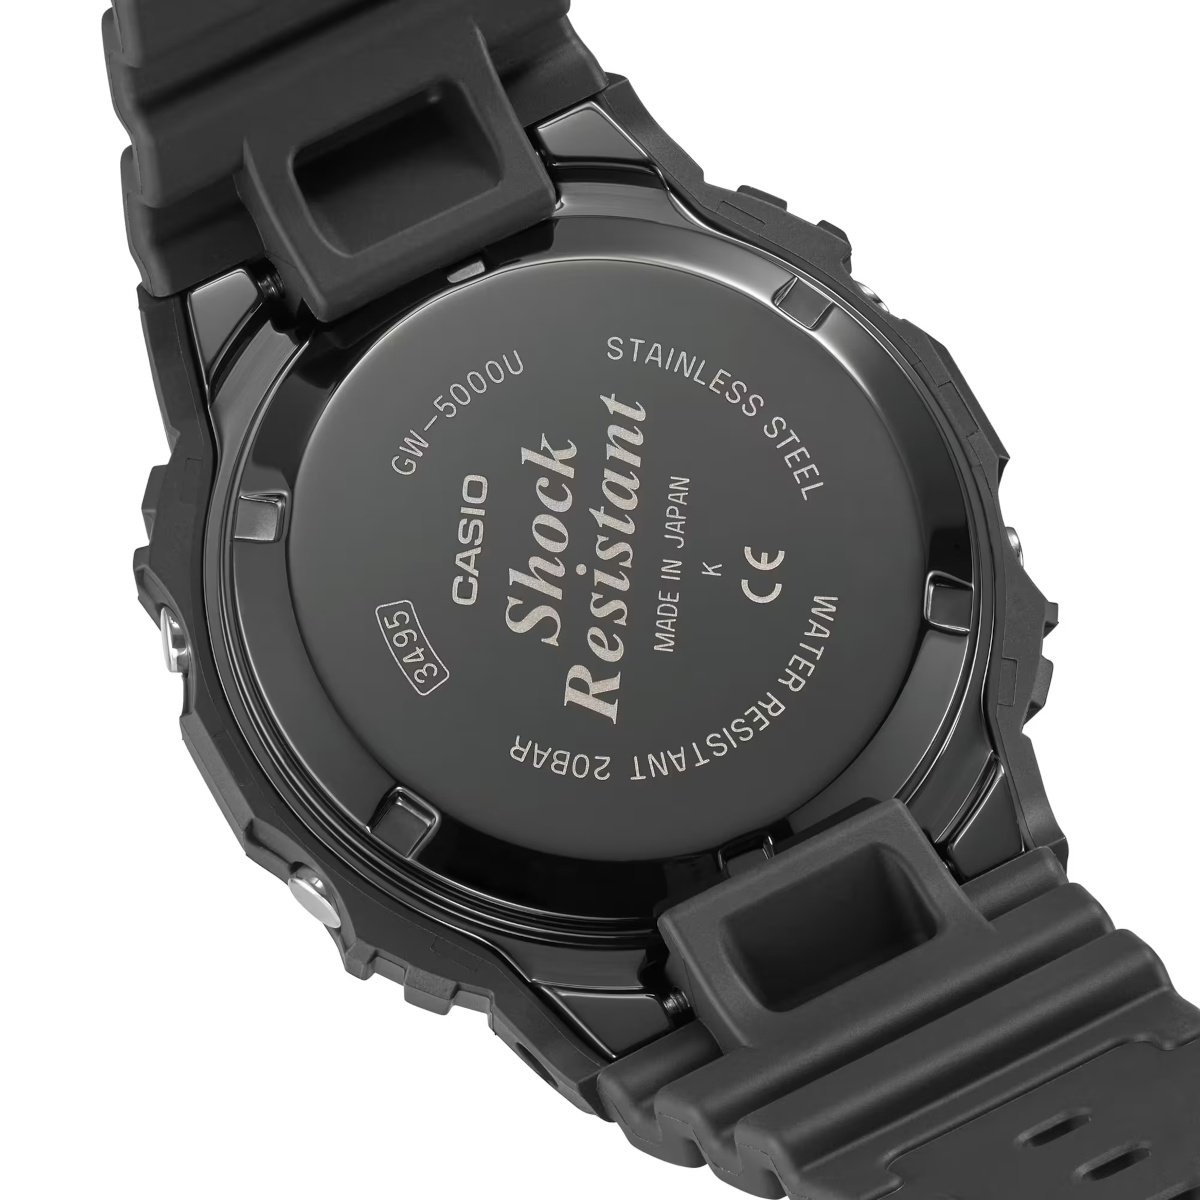 Soak Rindende Knoglemarv G-Shock GW5000U-1 is now available from Casio America (Limited)